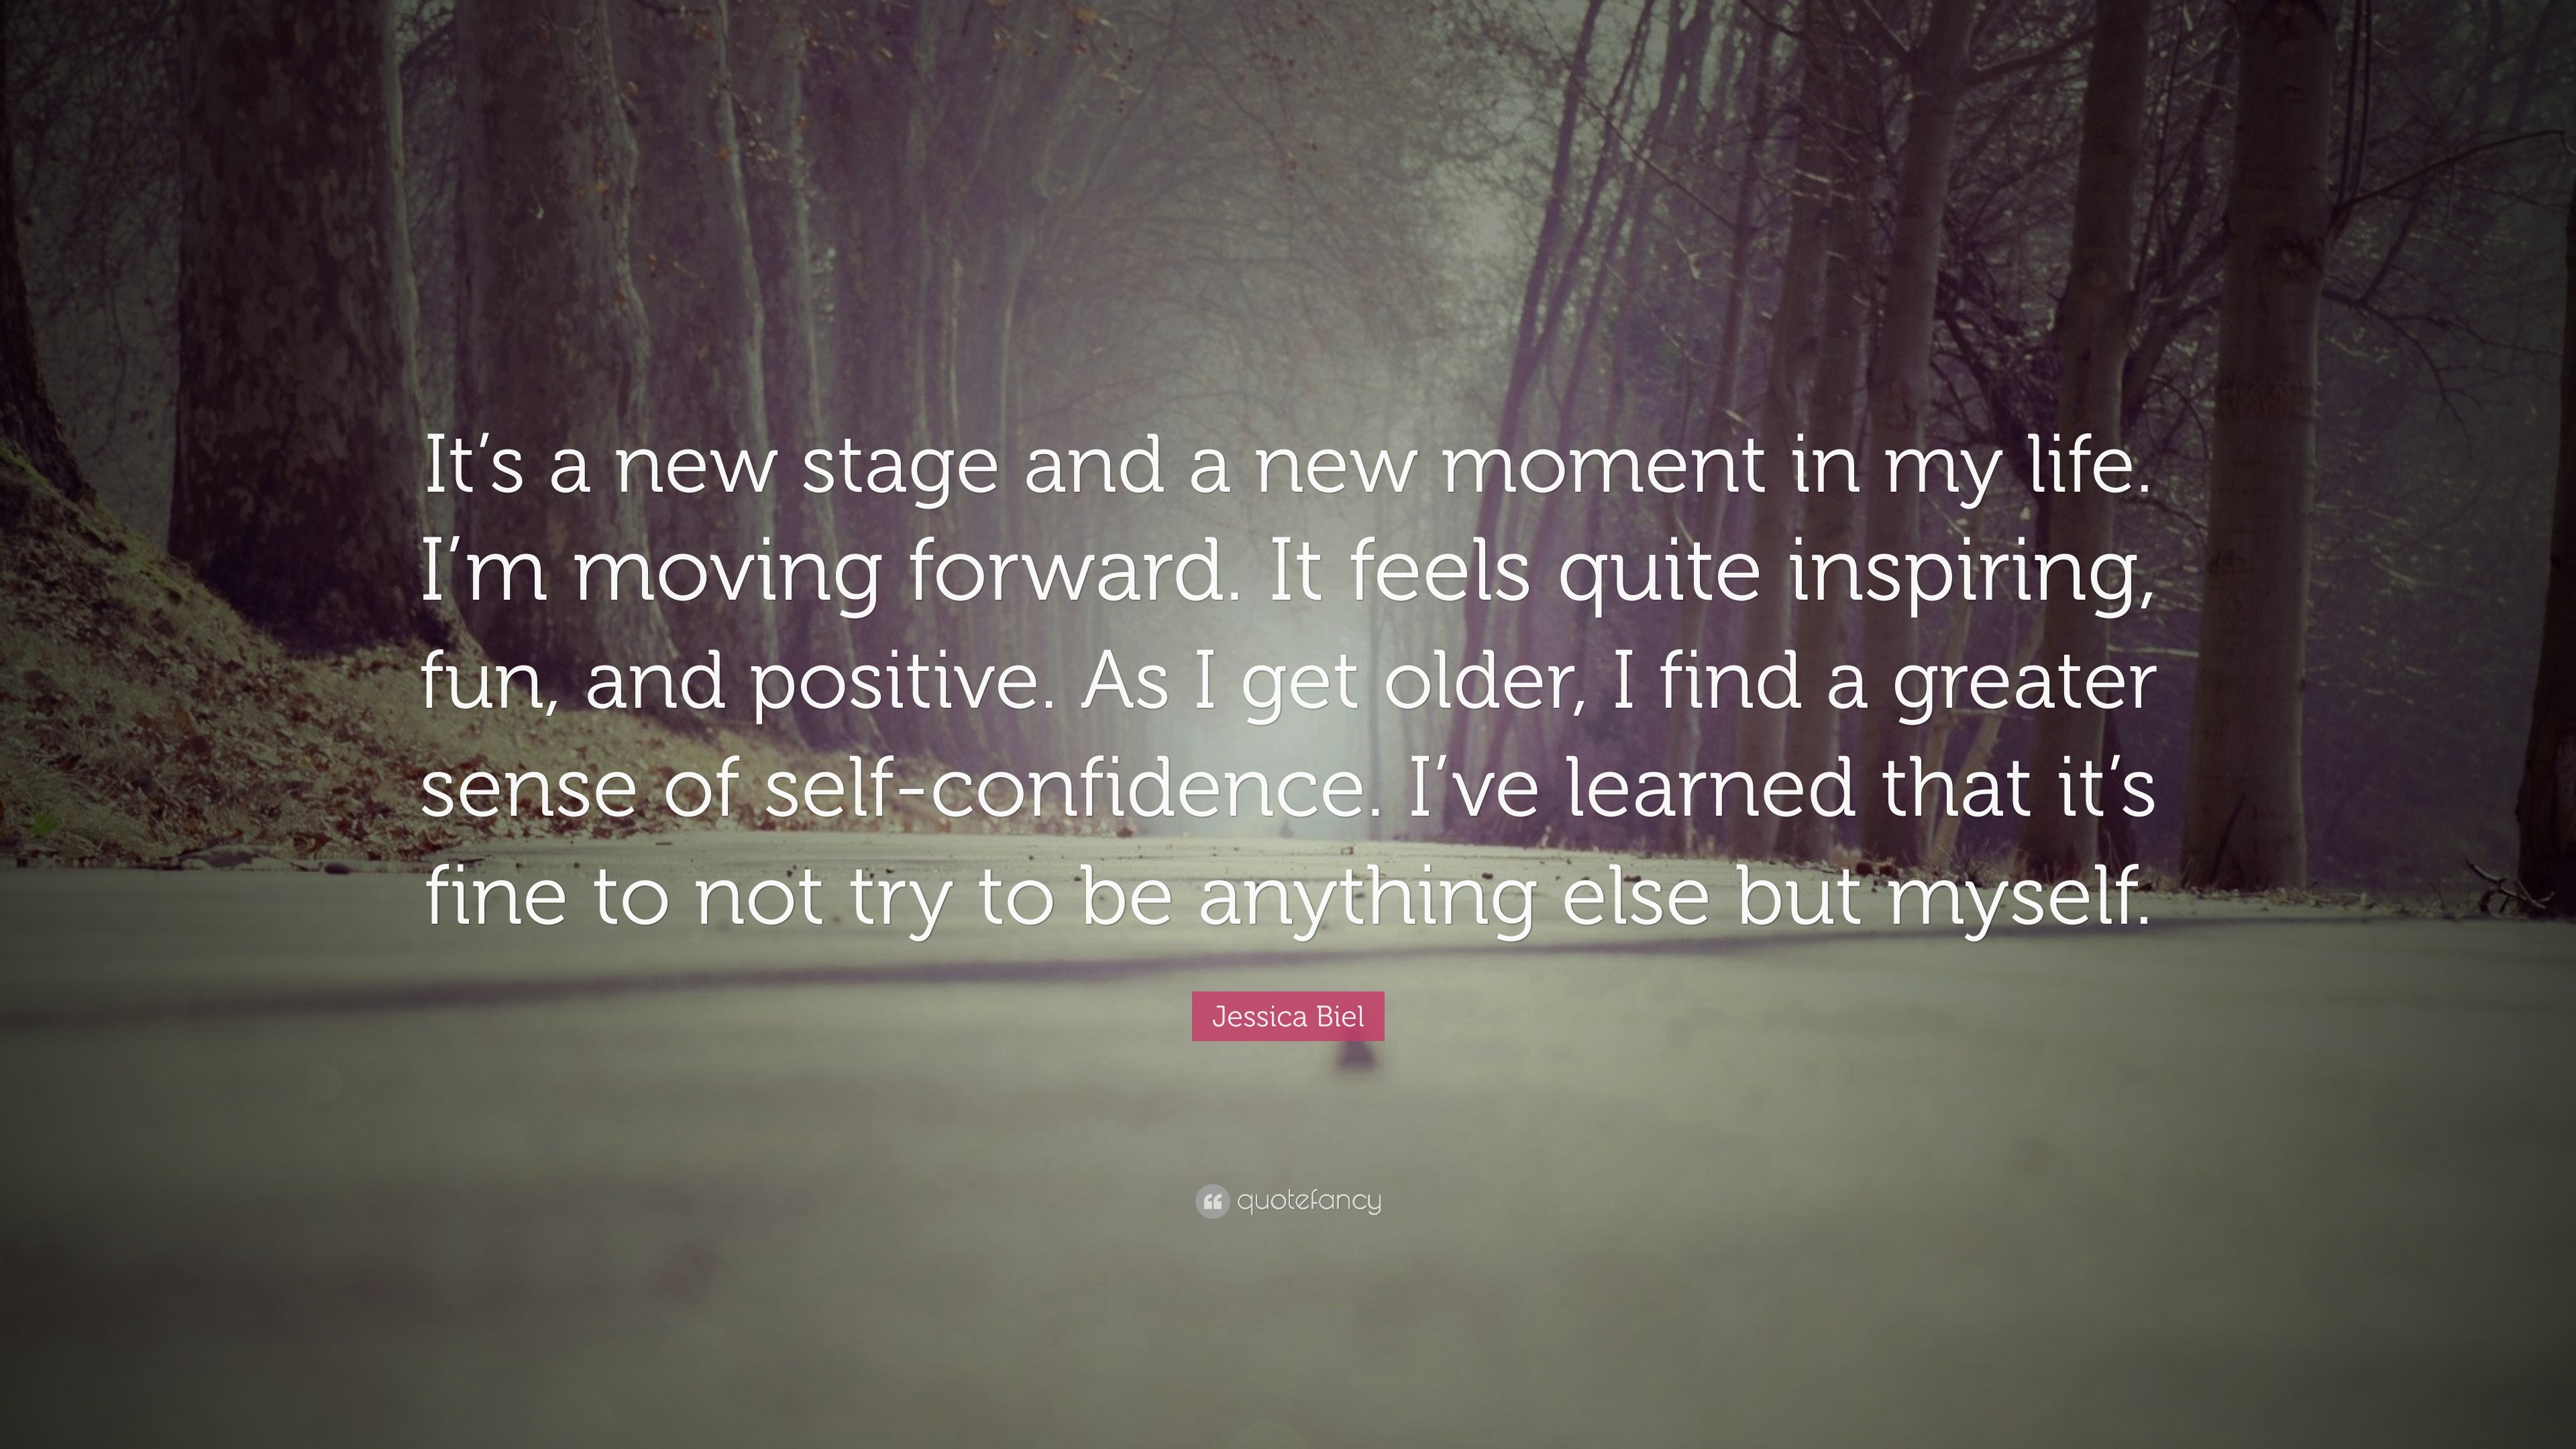 Jessica Biel Quote “It s a new stage and a new moment in my life